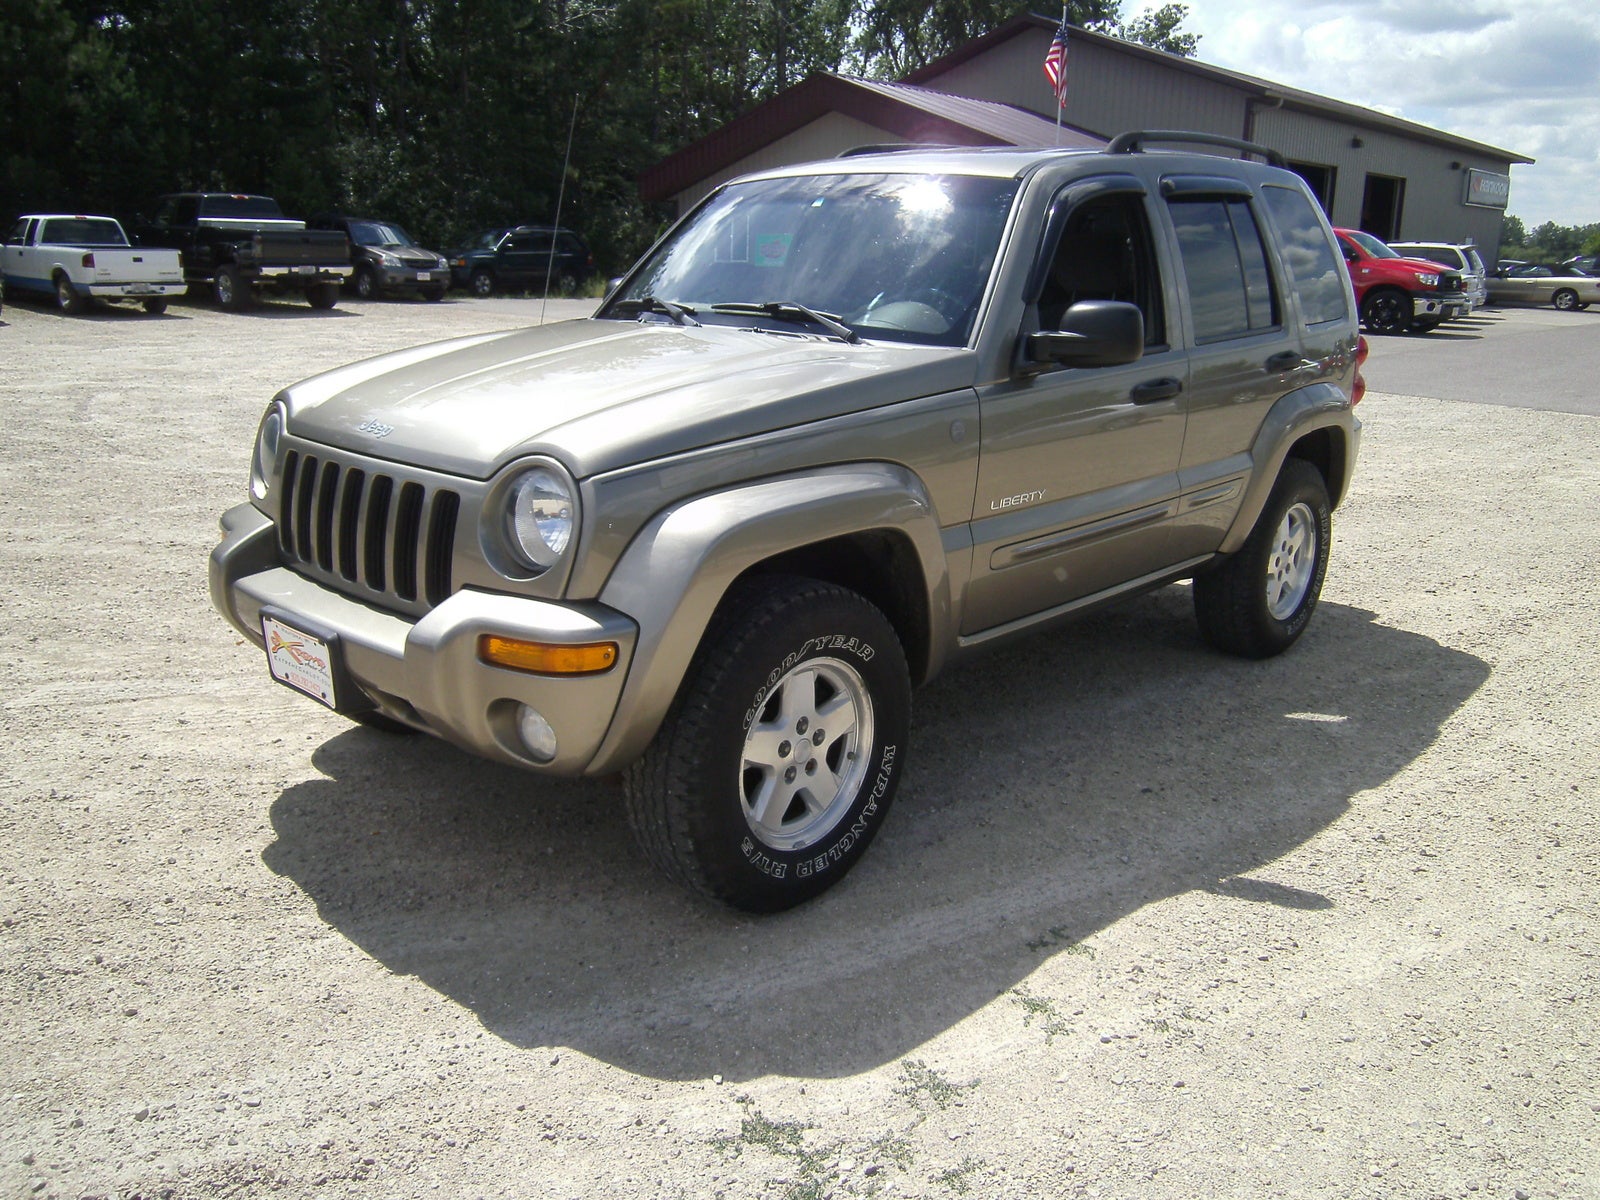 Ratings for jeep liberty 2004 #5